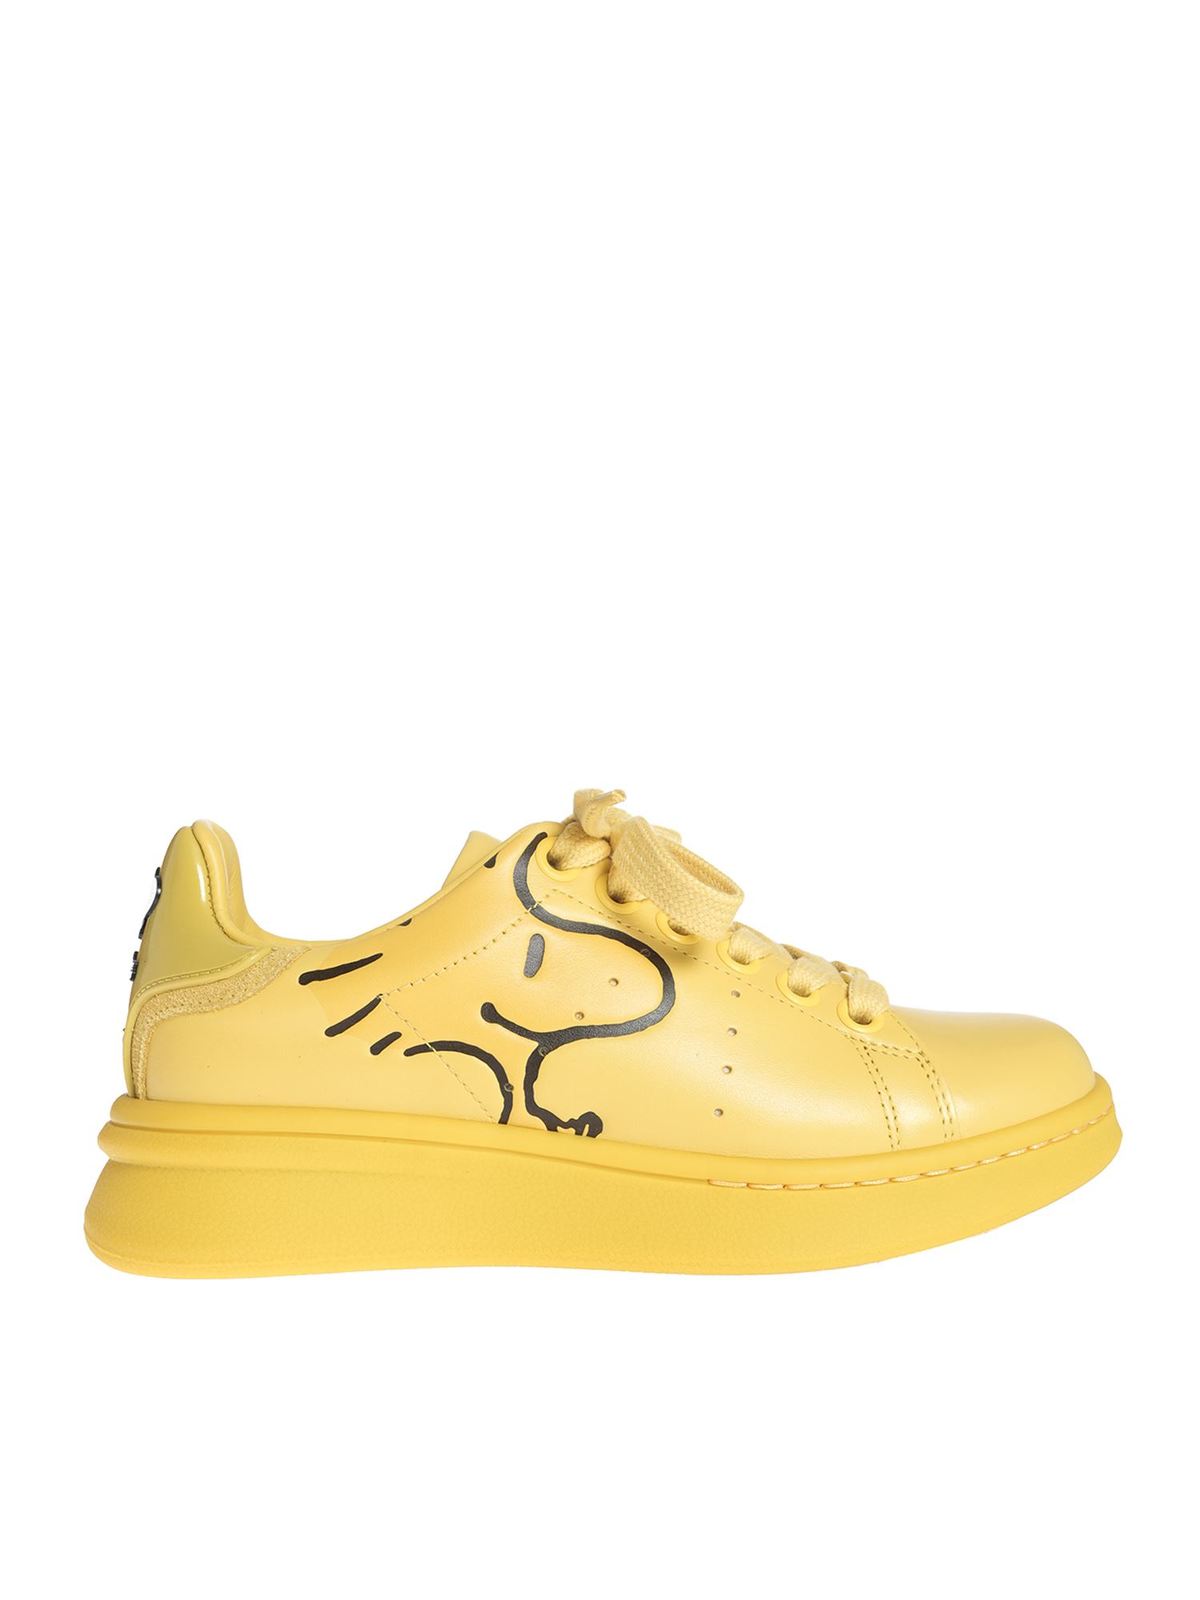 MARC JACOBS PEANUTS X THE TENNIS SHOE IN YELLOW